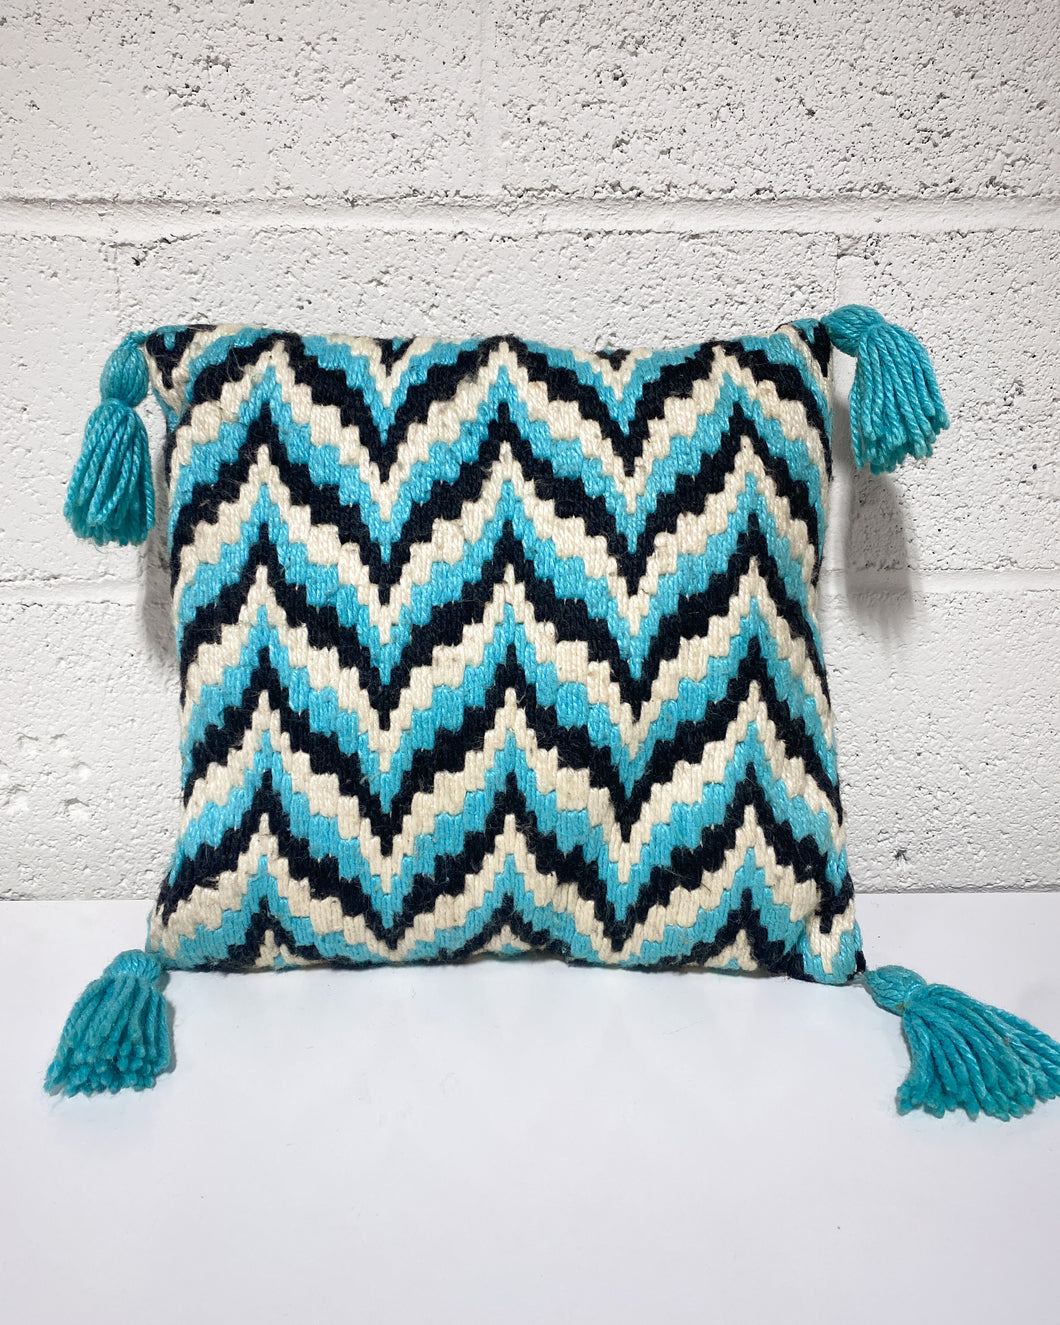 Vintage Turquoise and Black Woven Pillow with Tassels